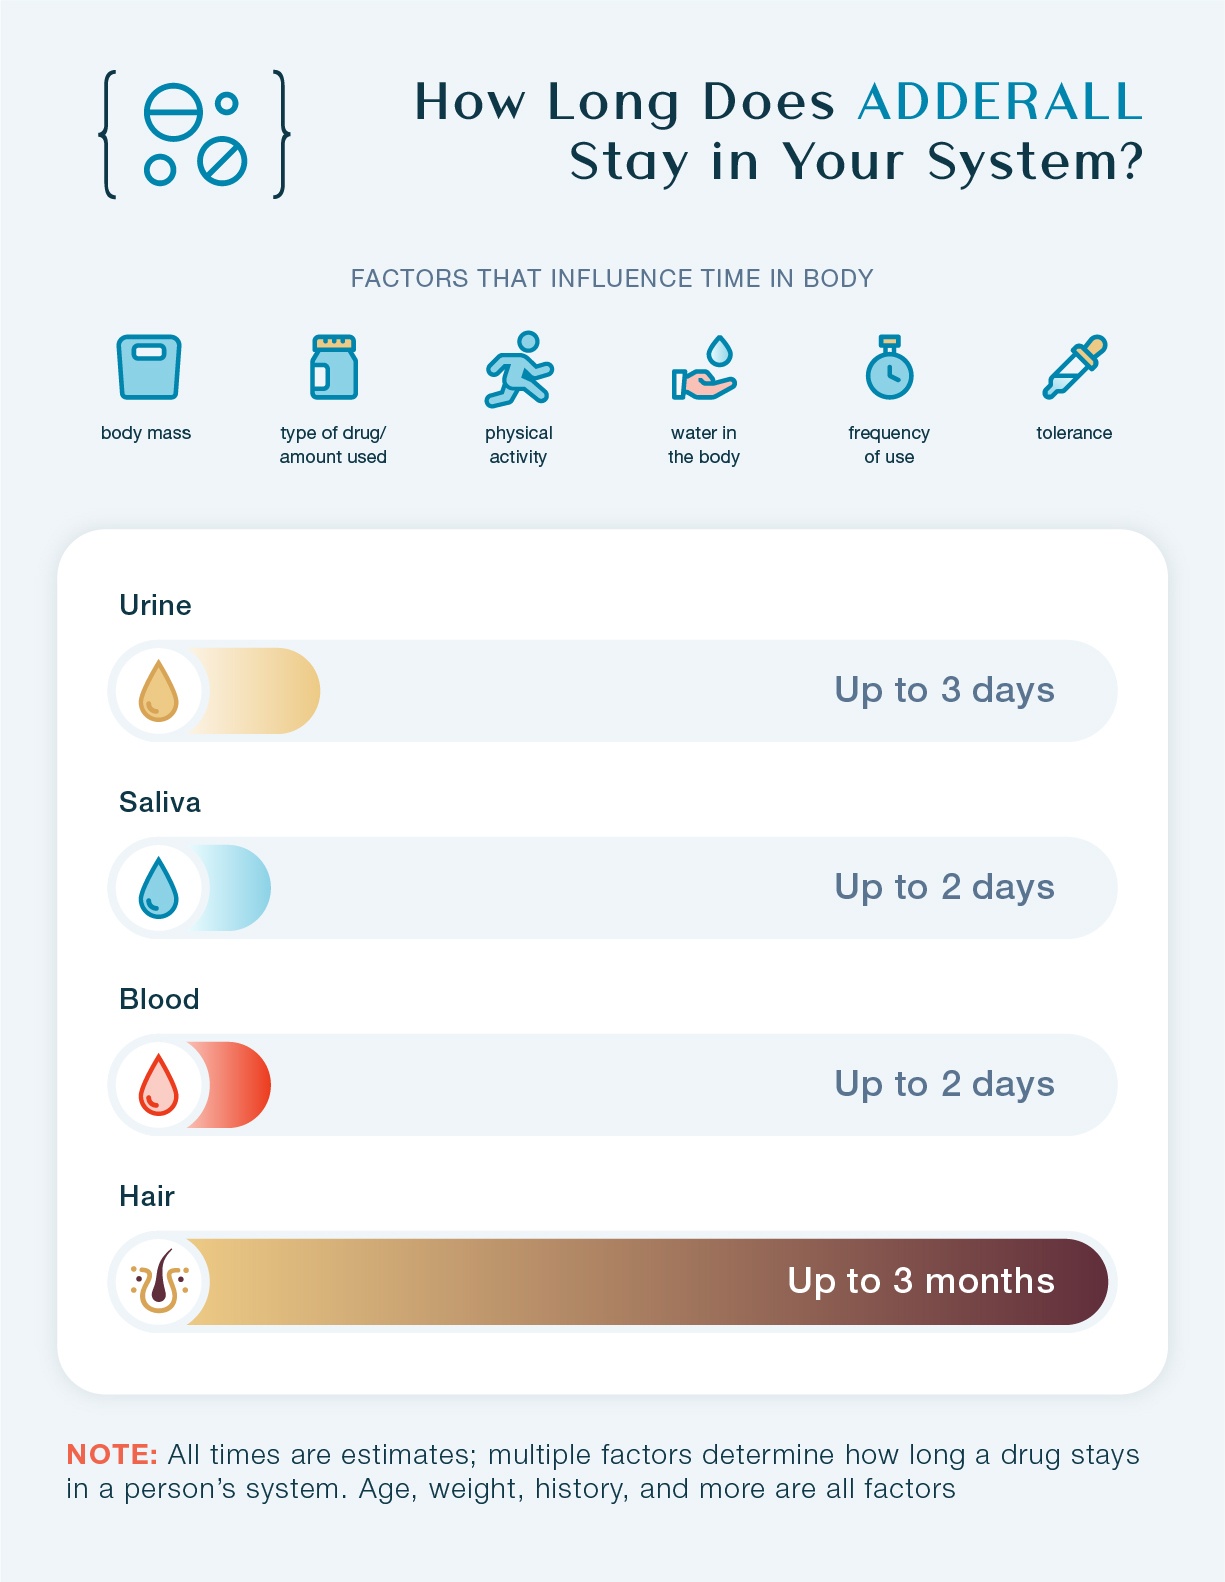 How Long Does Adderall Stay In Your System? This chart shows how long Adderall stays in urine, saliva, blood, and hair